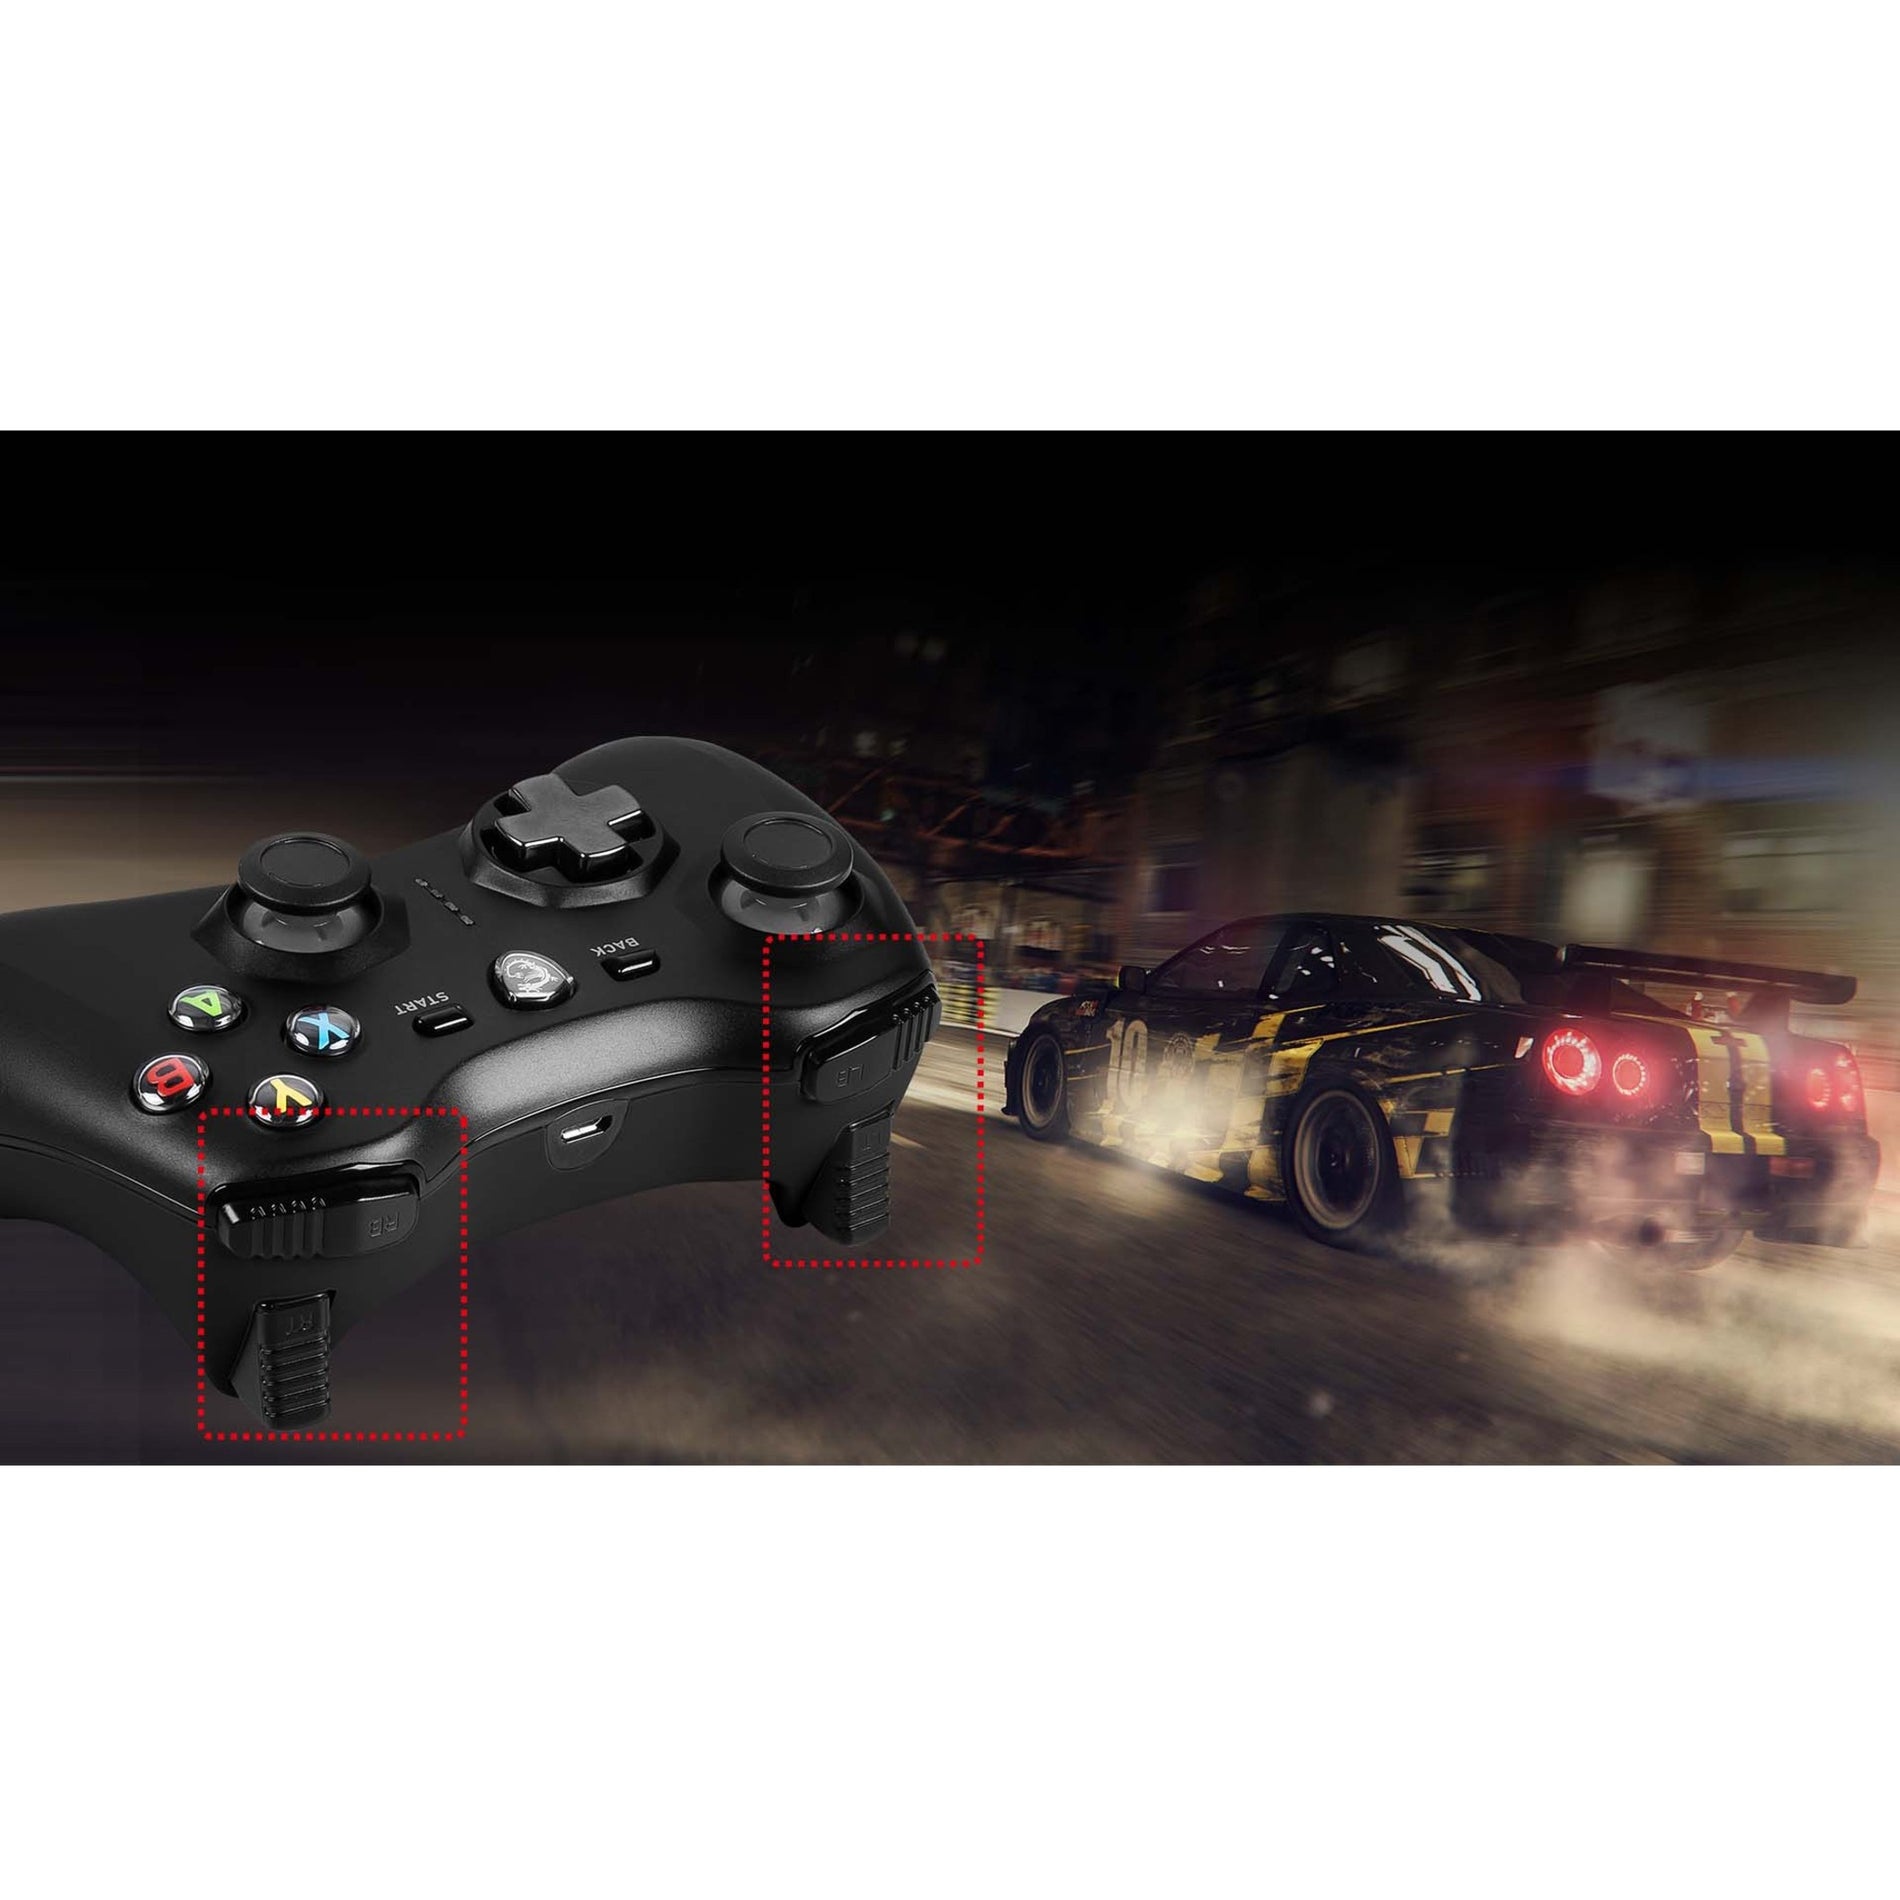 MSI FORCEGC30V2 Gaming Pad, Wireless and Cable Connectivity, Vibration Feedback